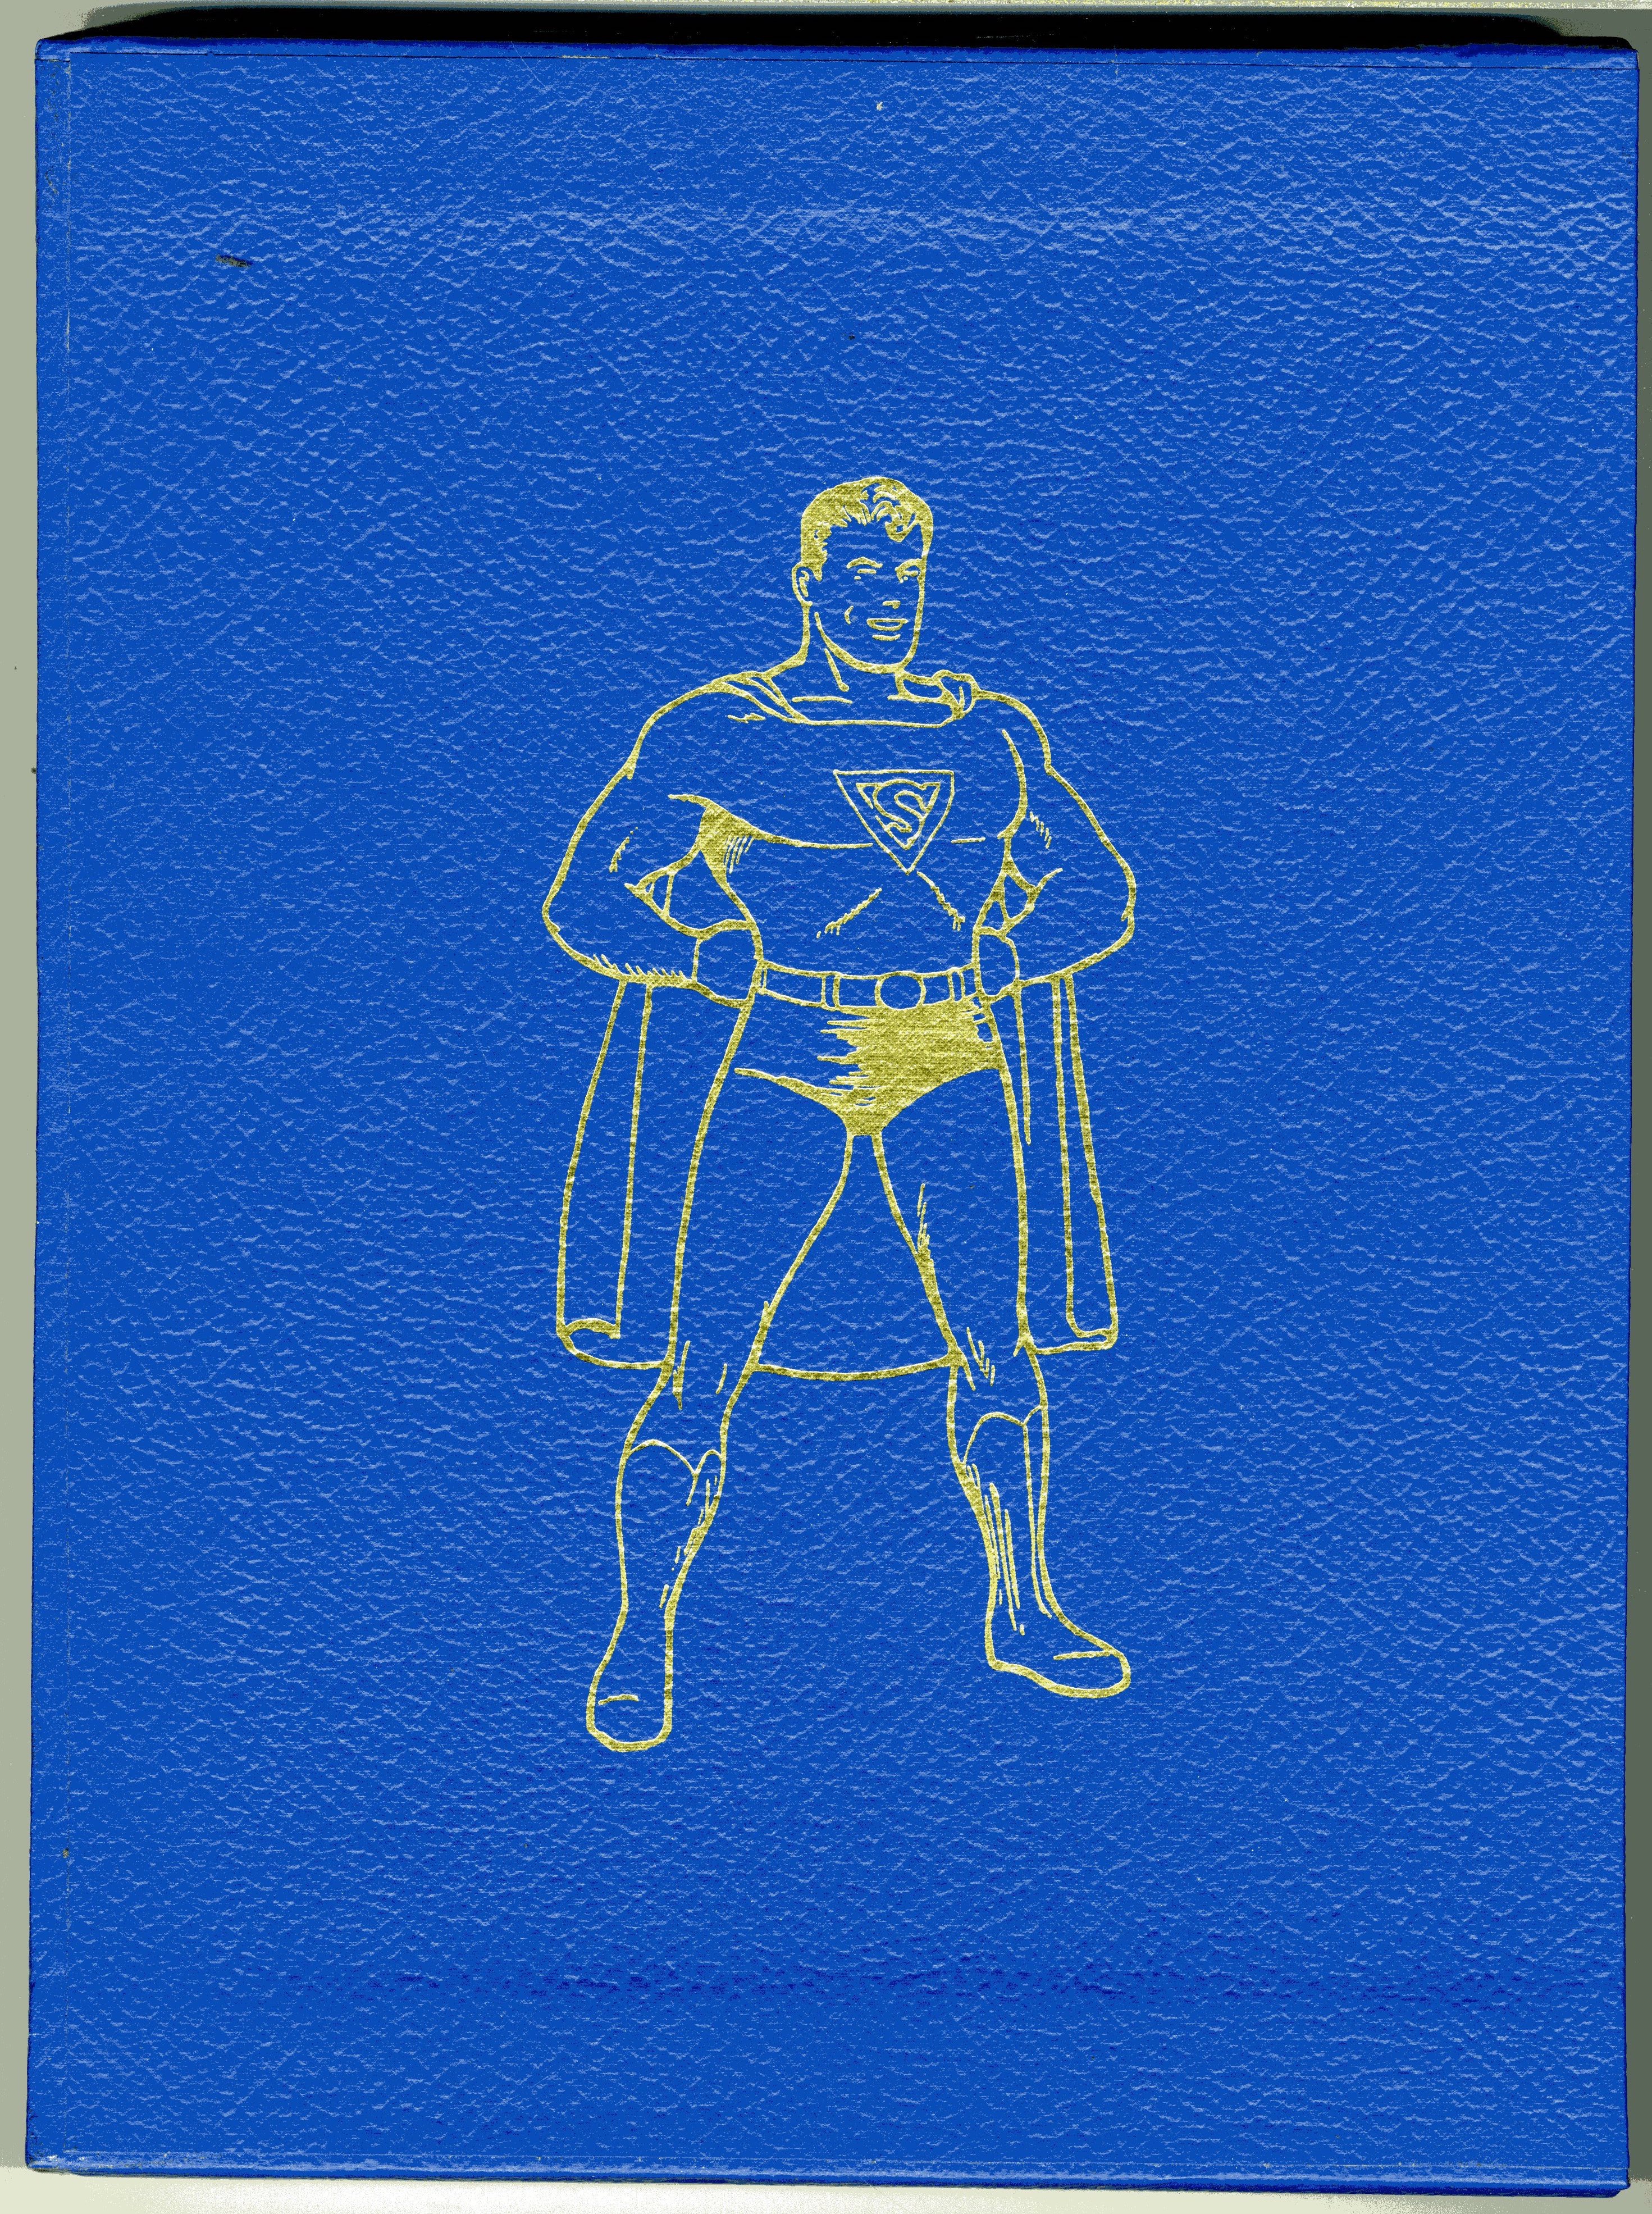 Adventures In Superman Collecting Hard Cover Book - 21419